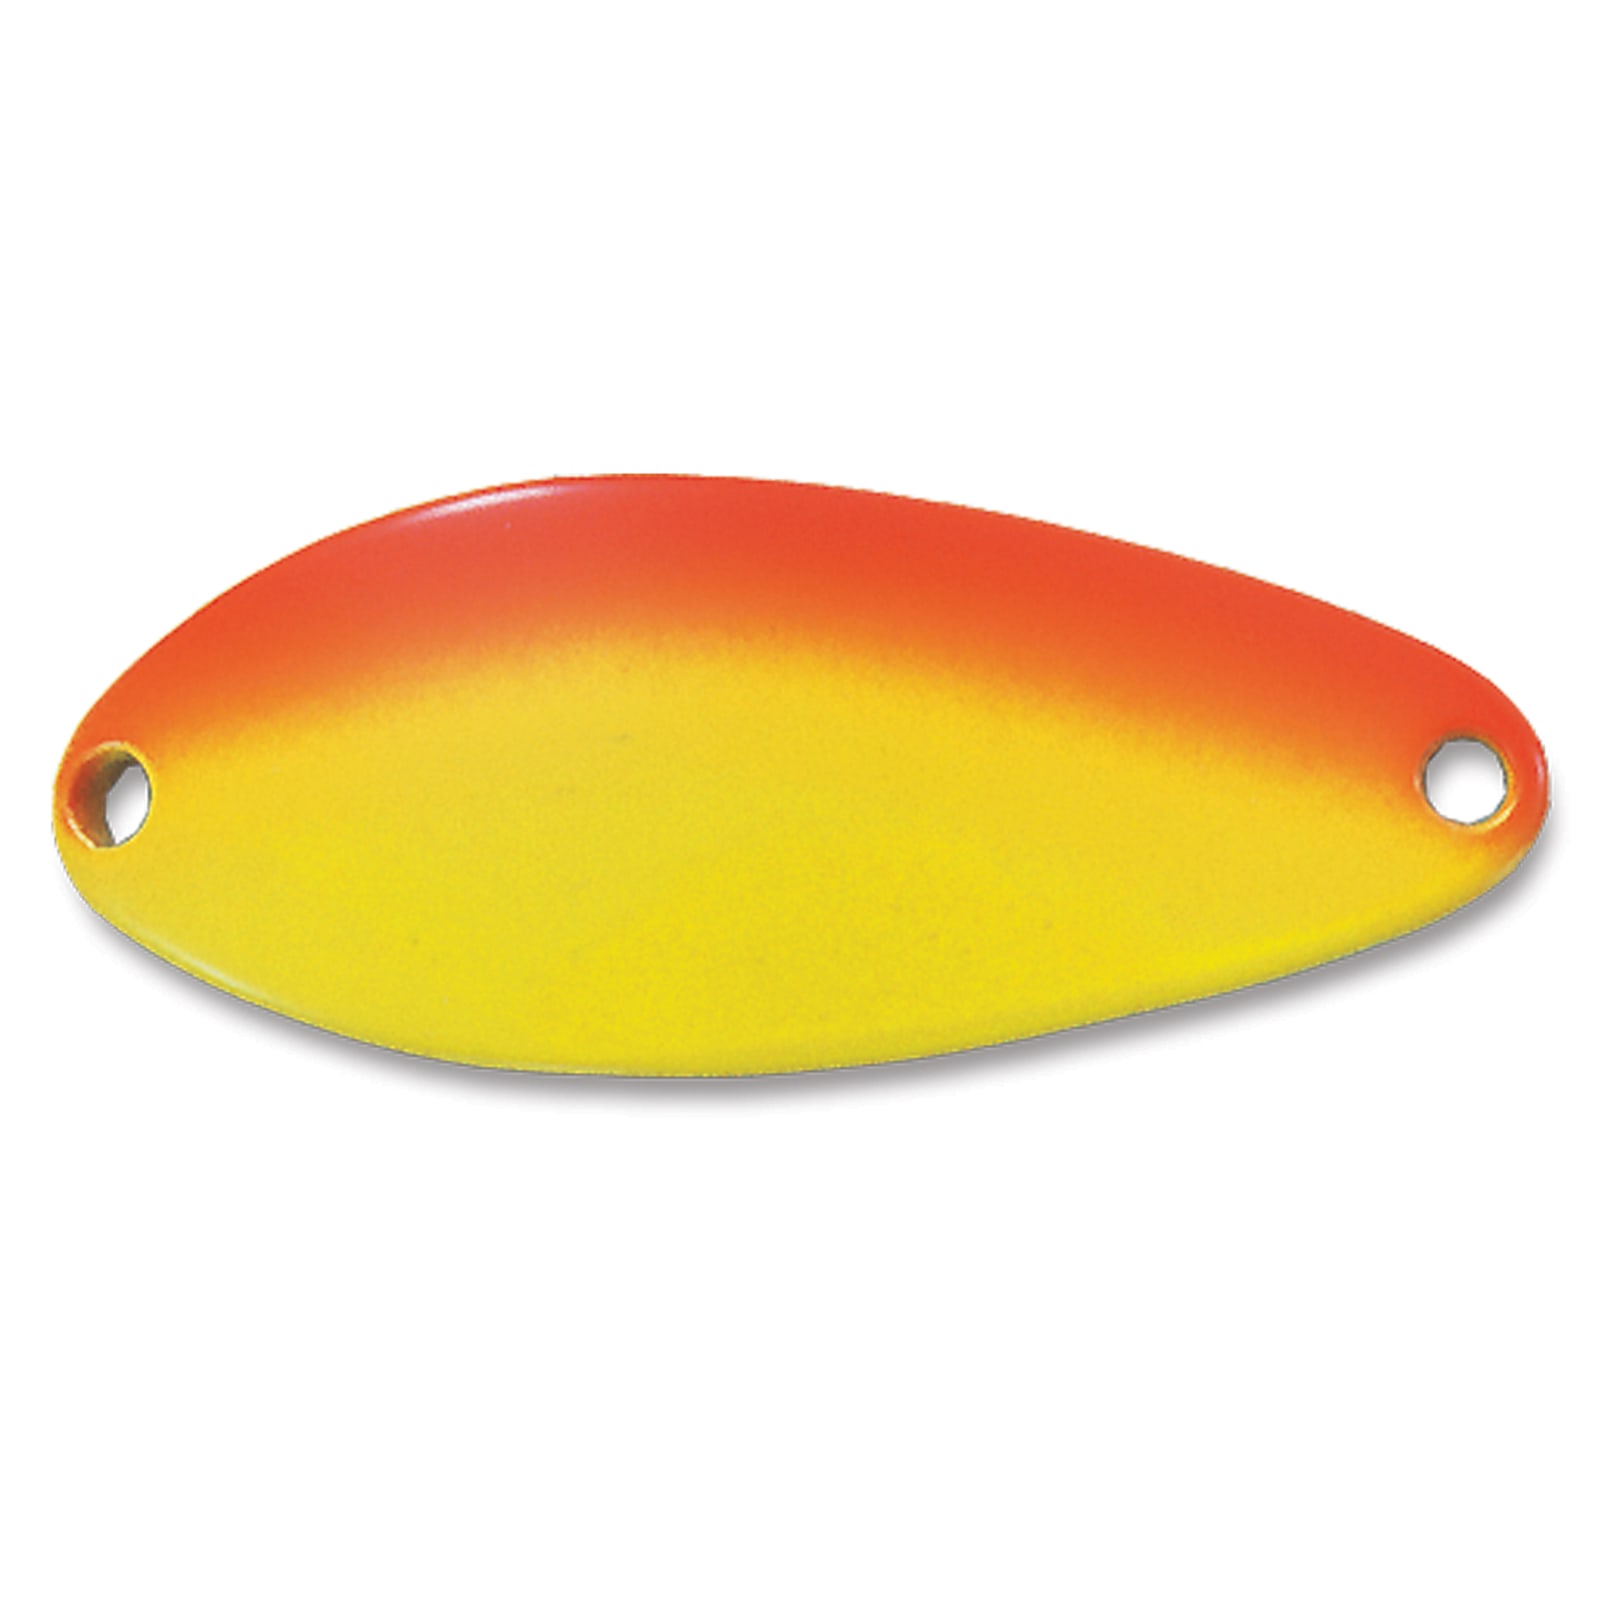 Little Cleo Spoon - Tequila Sunrise by Acme Tackle Company at